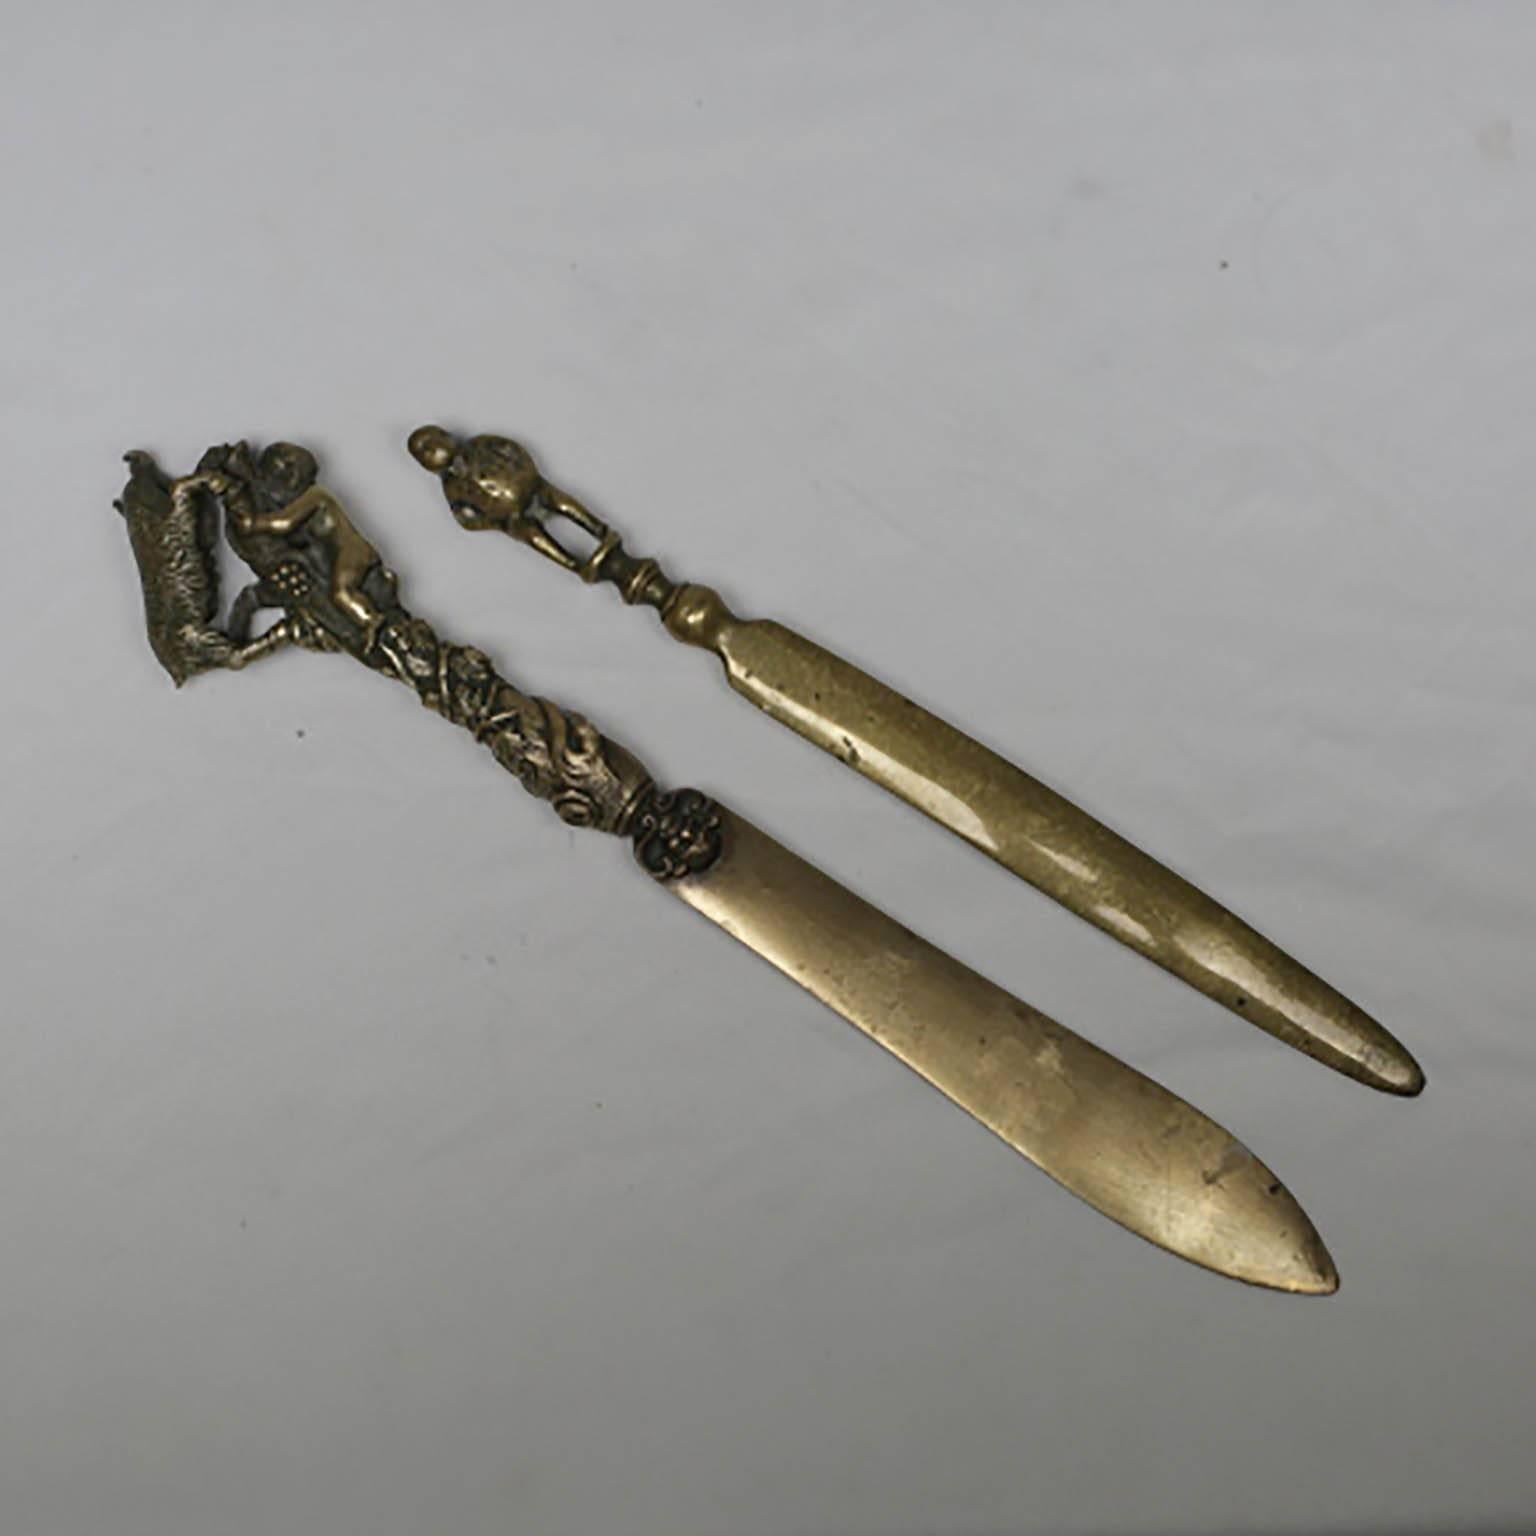 Two bronze letter openers may be sold separately. 

Large bronze letter opener depicting a boy with a goat. 
Measures: 9.75